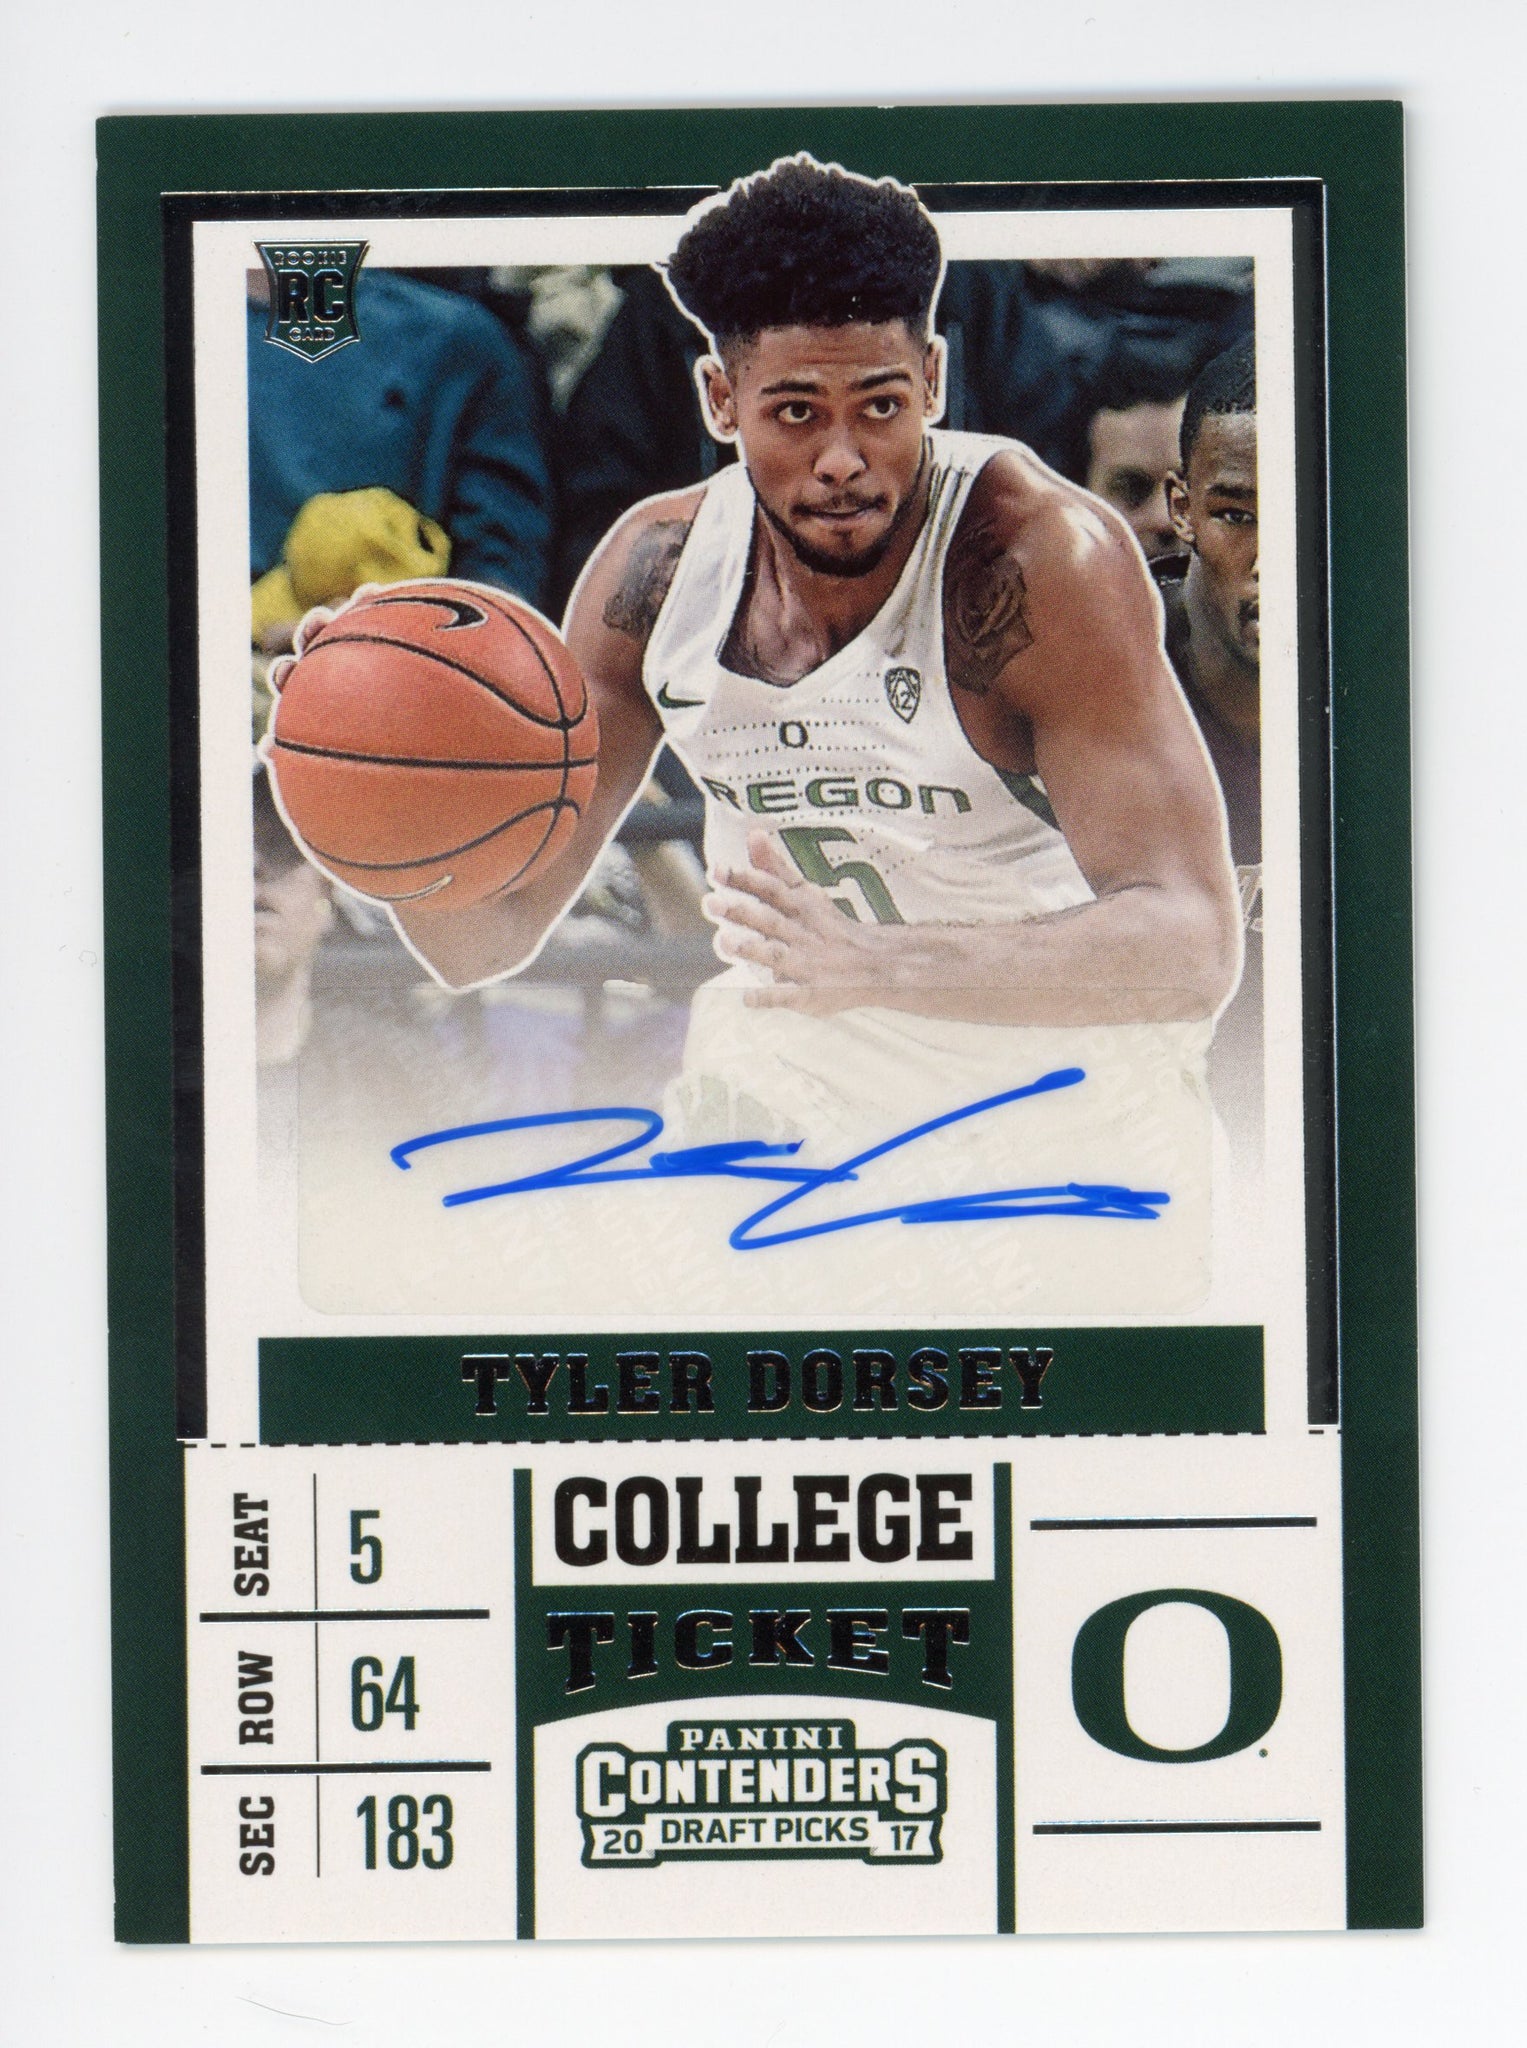 2017 Panini Contenders Tyler Dorsey Rookie Draft College Ticket Autograph #82